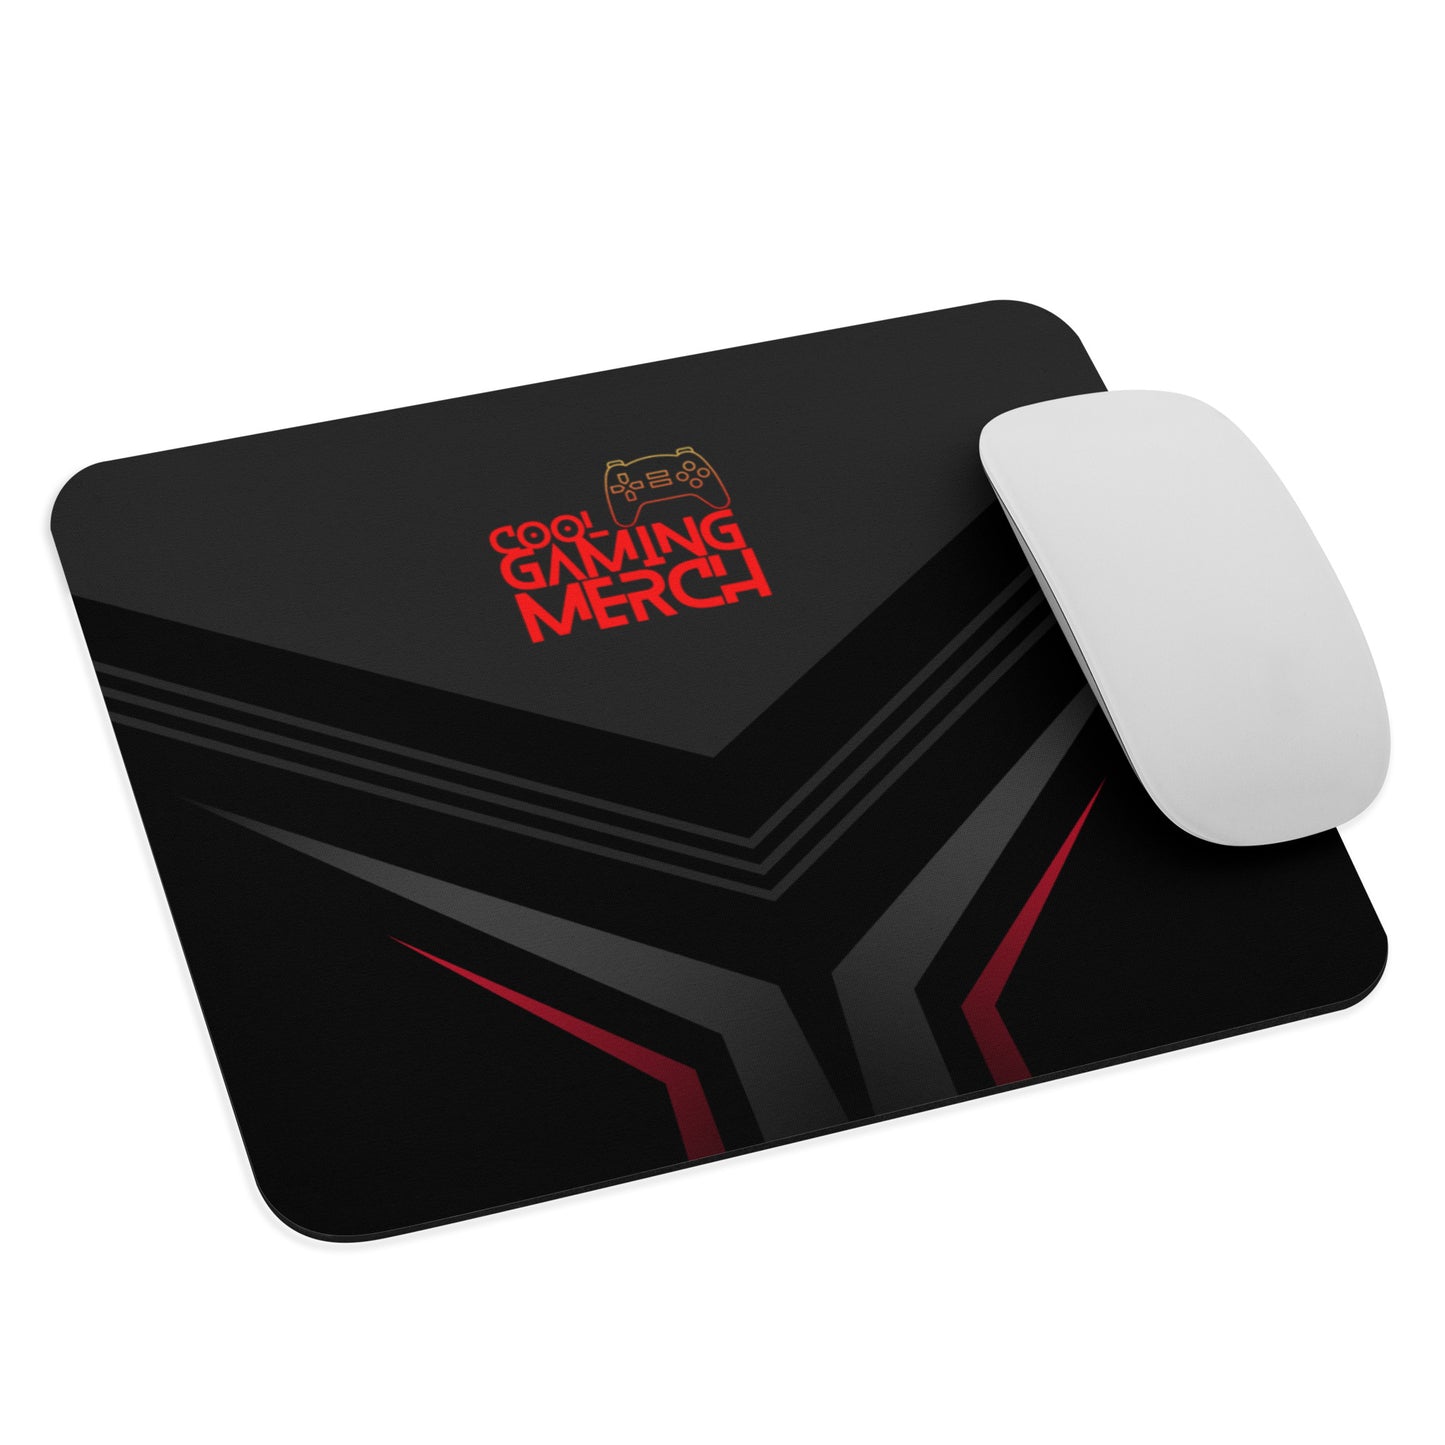 Mouse-pad with cool gaming merch logo and plain white mouse